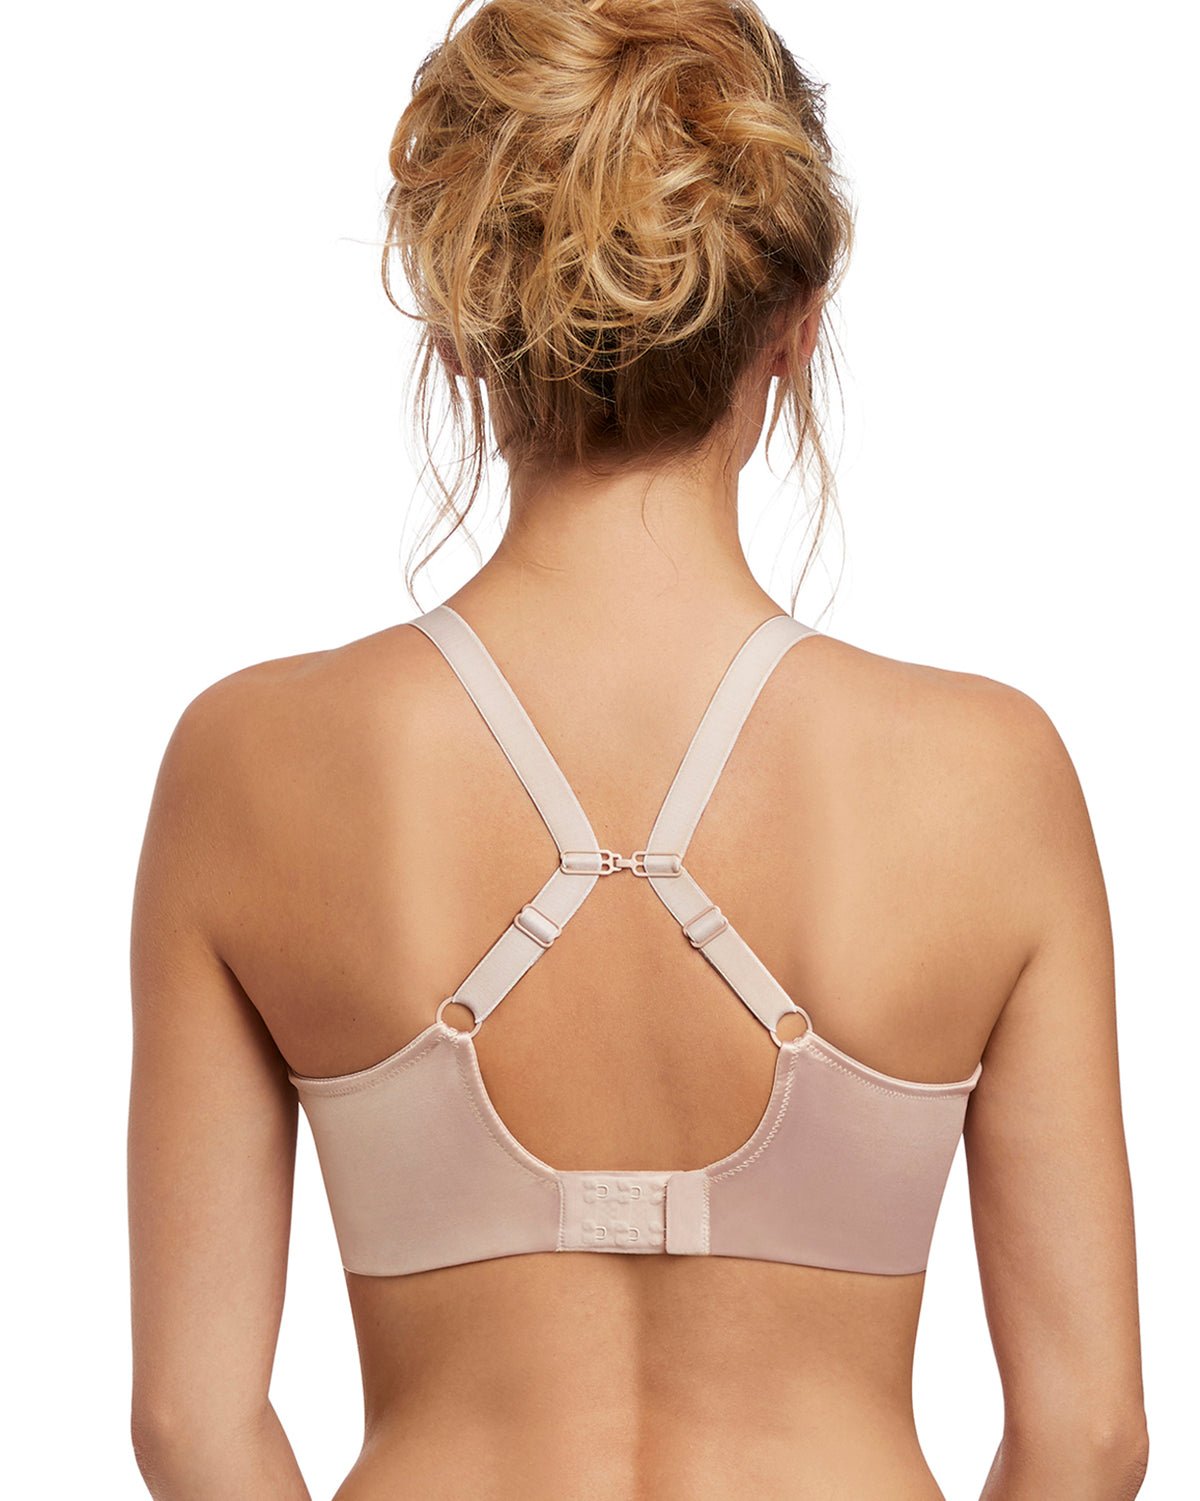 The Fantasie Bra that 9 out of 10 women would change their current bra for!  - Underlines Magazine